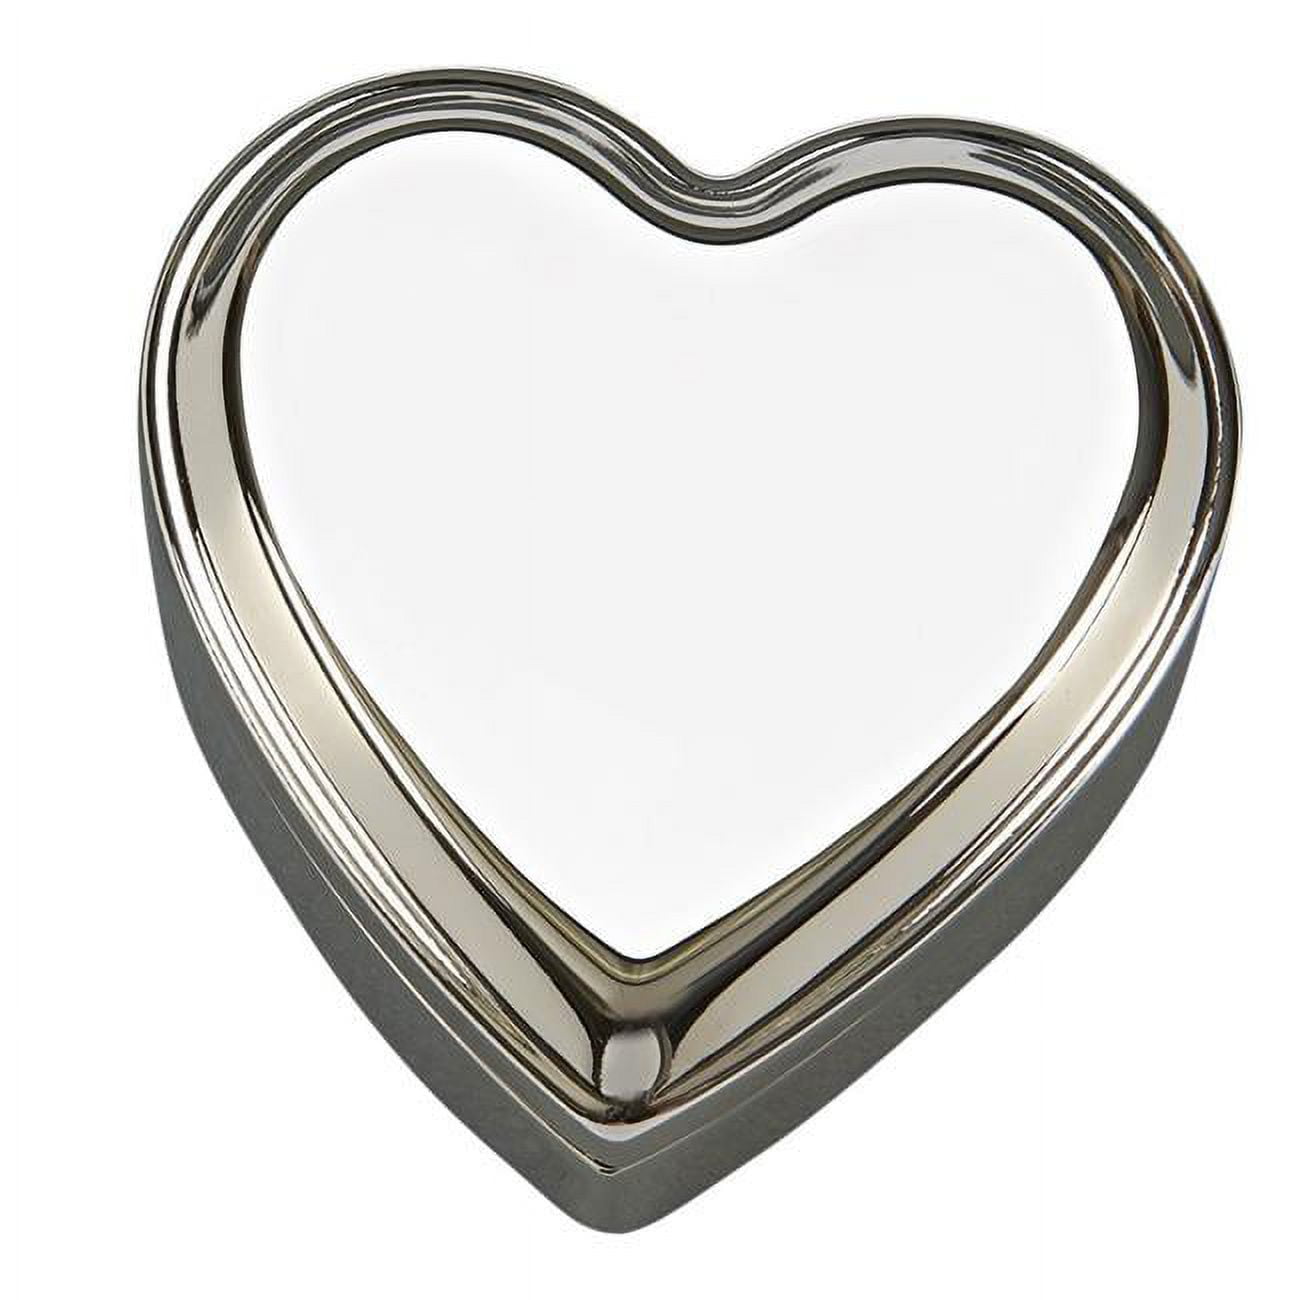 3.5 In. Heart Box Lift Top - Nickel Plated